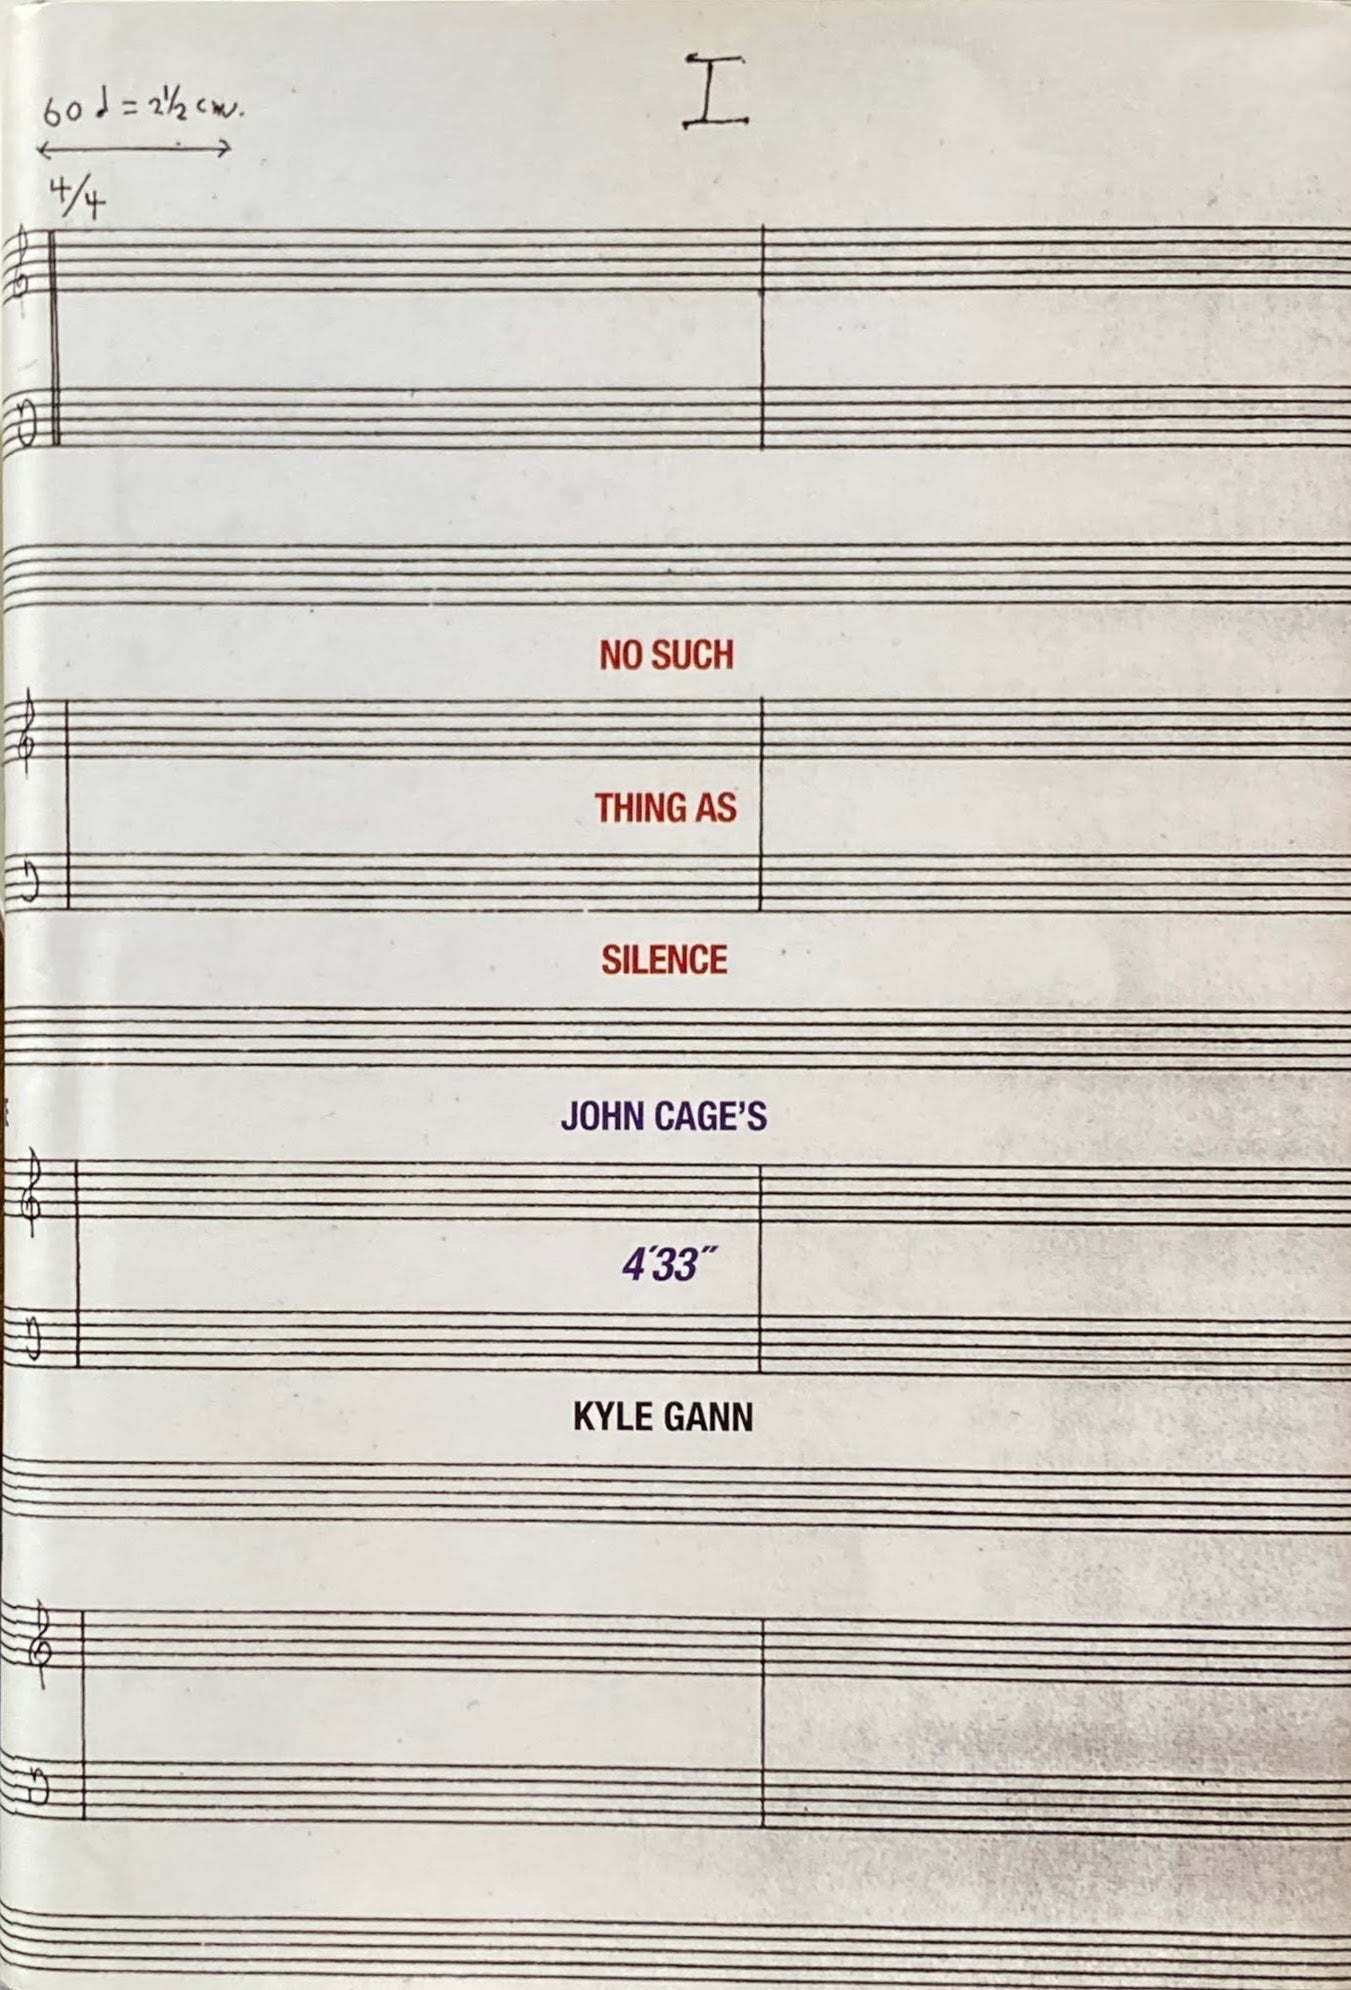 No Such Thing as Silence: John Cage's 4'33" 　Kyle Gann　ジョン・ケージ